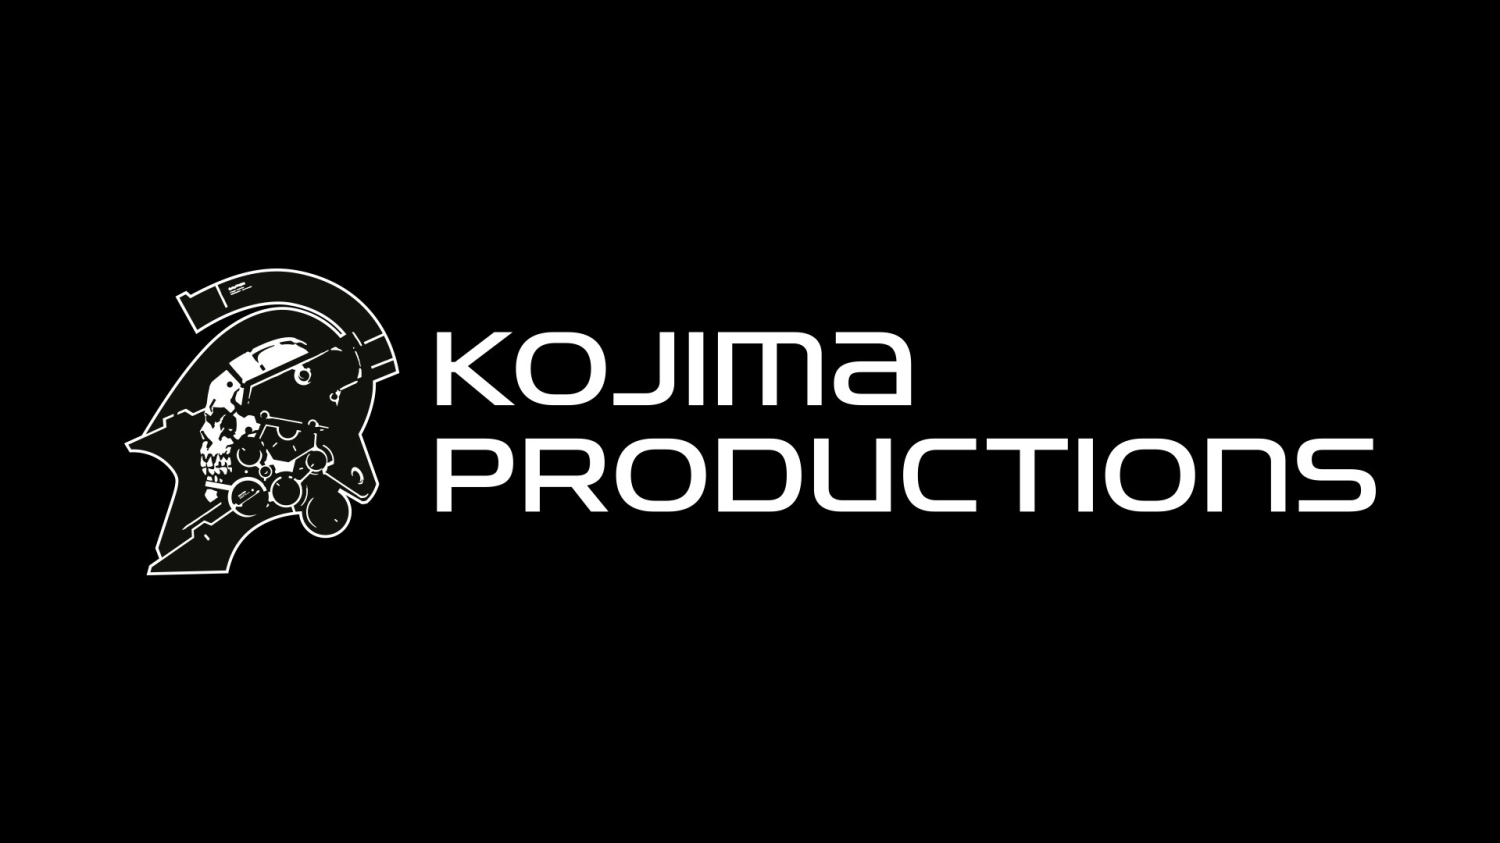 Hideo Kojima is making a horror game with Jordan Peele and it's called OD